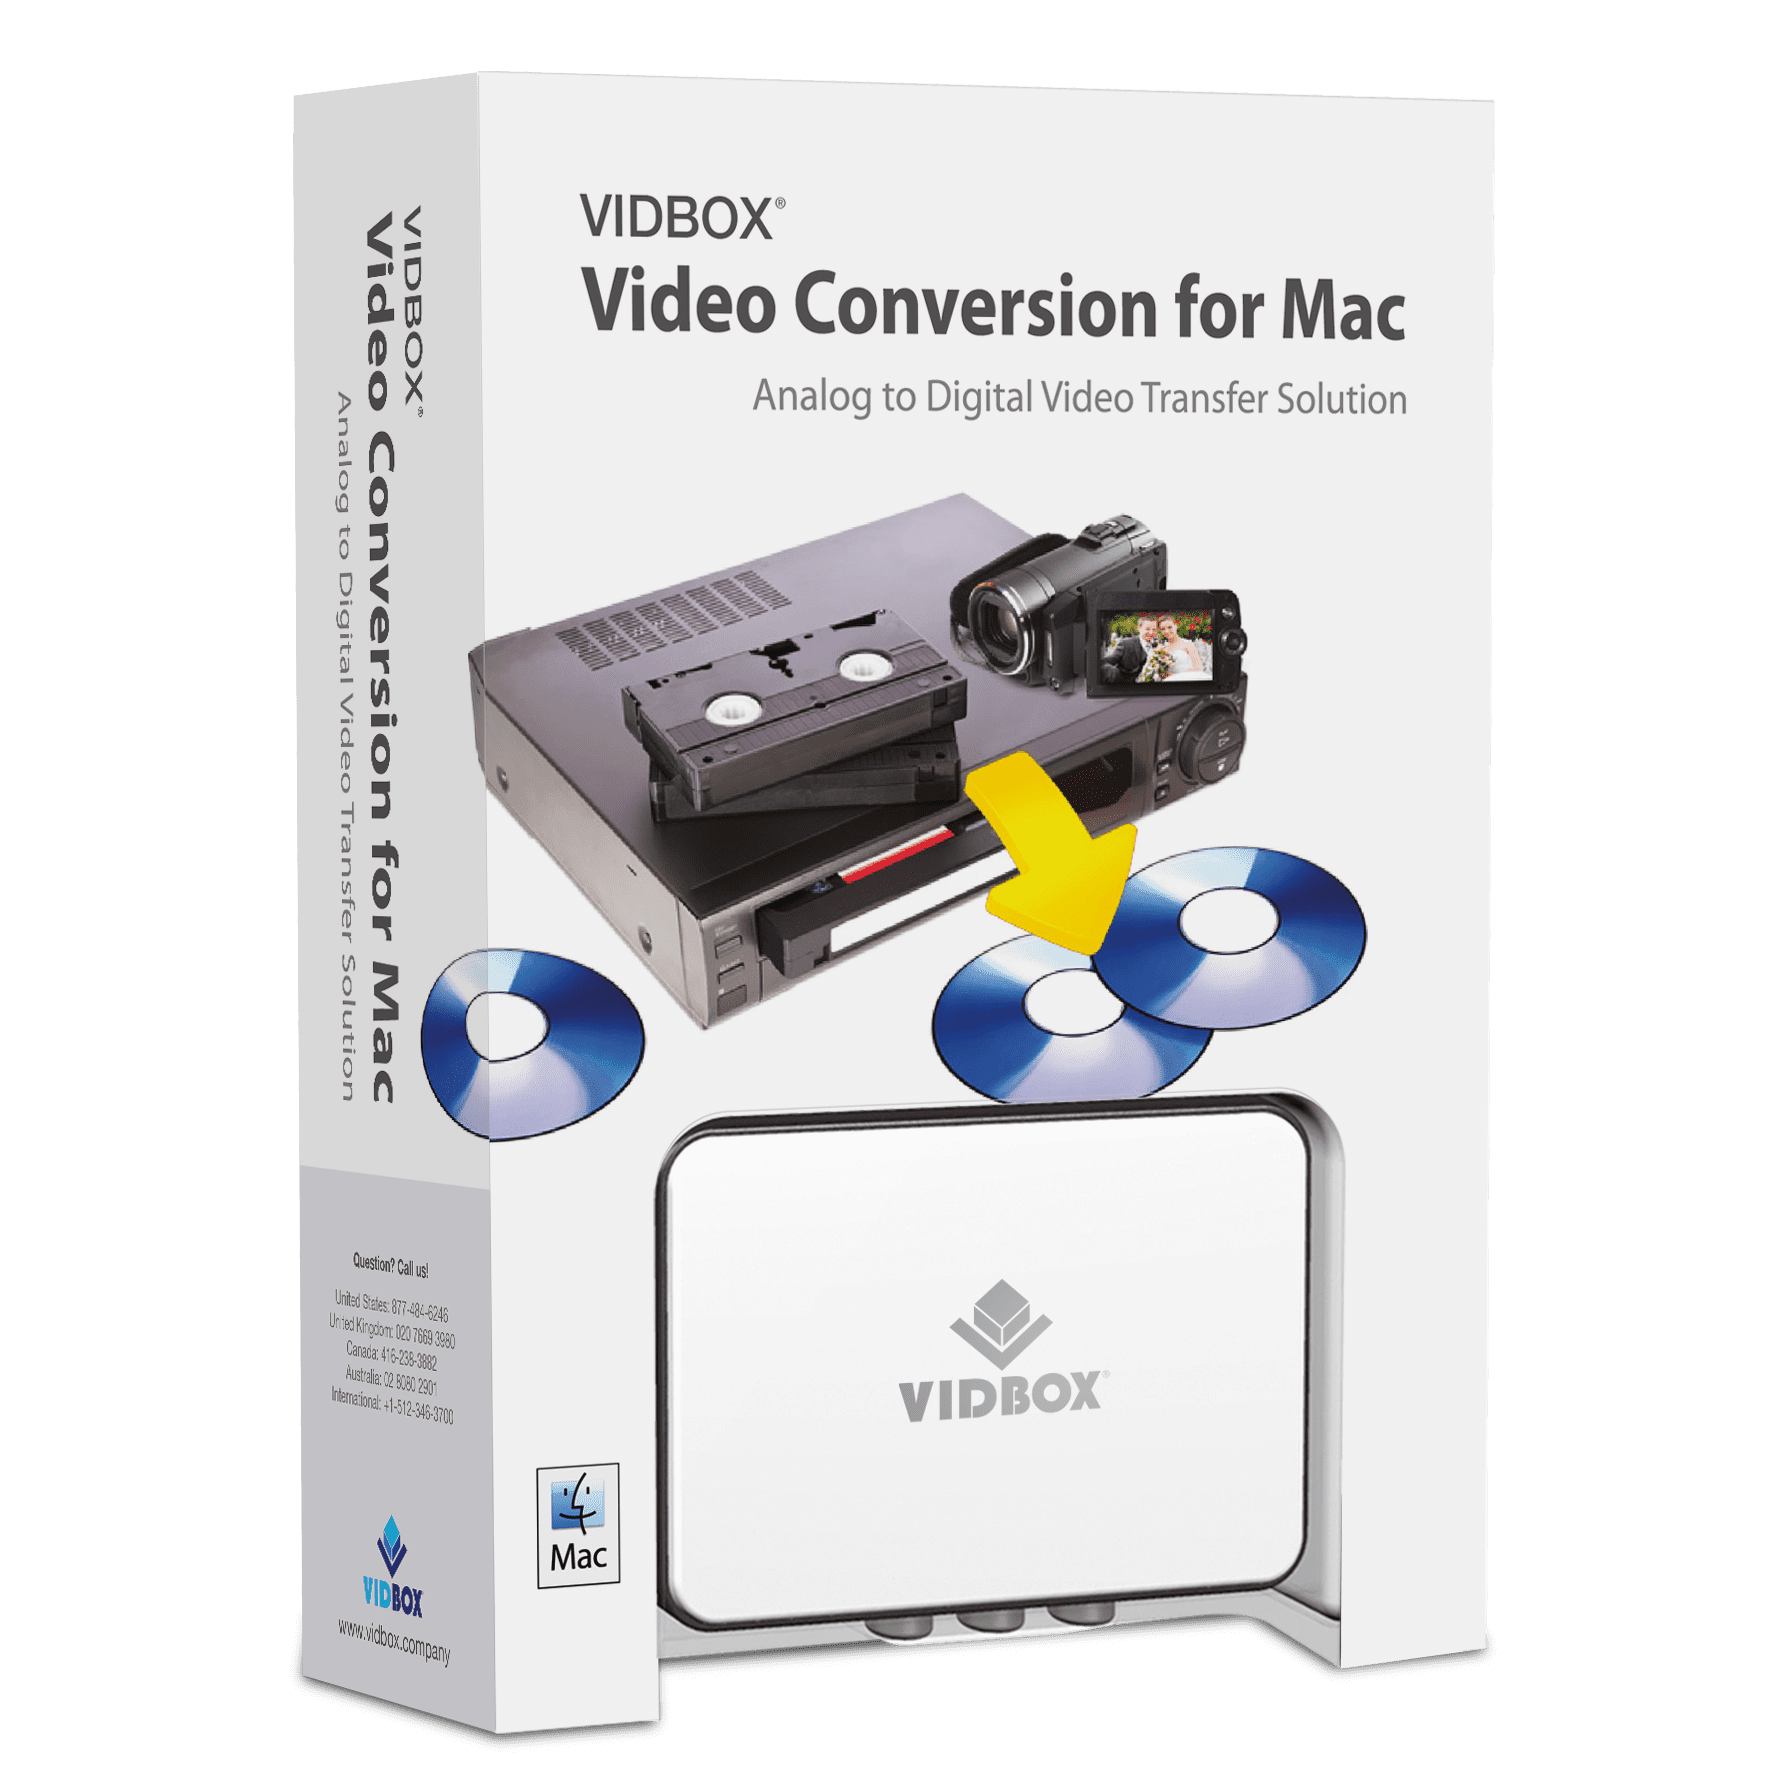 Does Walmart Convert VHS To DVD In 2022? (Full Guide)